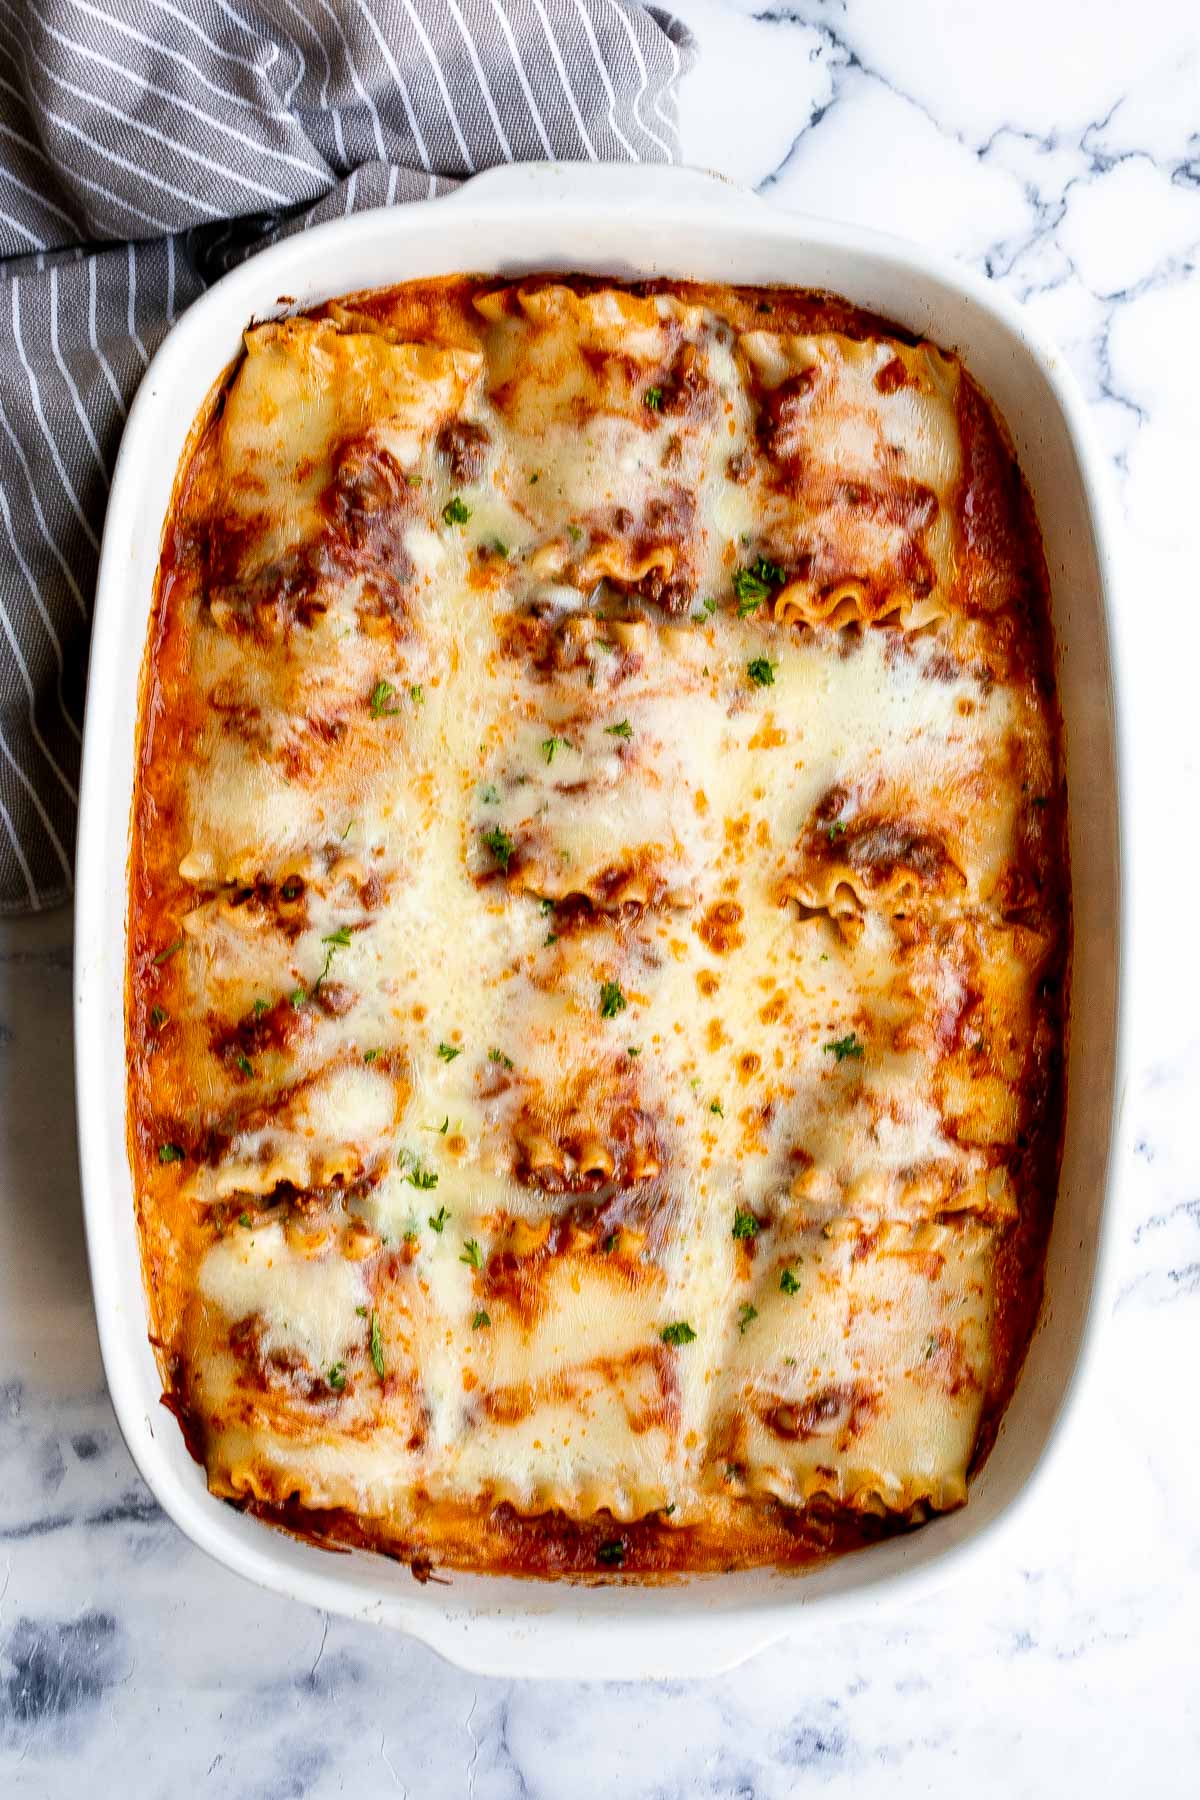 Lasagna roll ups are a twist on traditional lasagna. Lasagna noodles are filled with cheese and meat sauce and rolled up. Make ahead and freezer-friendly! | aheadofthyme.com